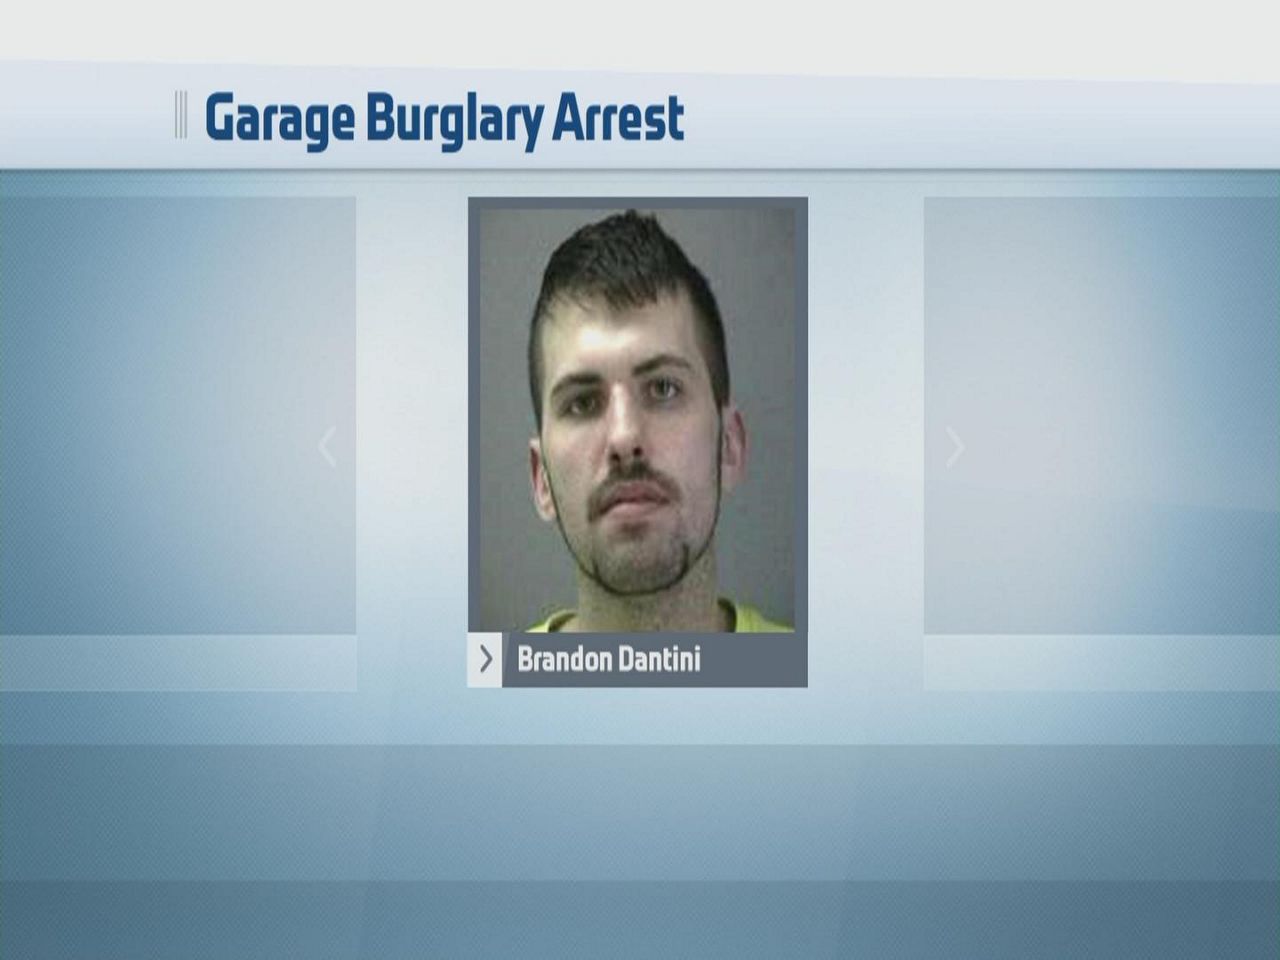 Man Charged in Irondequoit Auto Shop Burglary pic pic